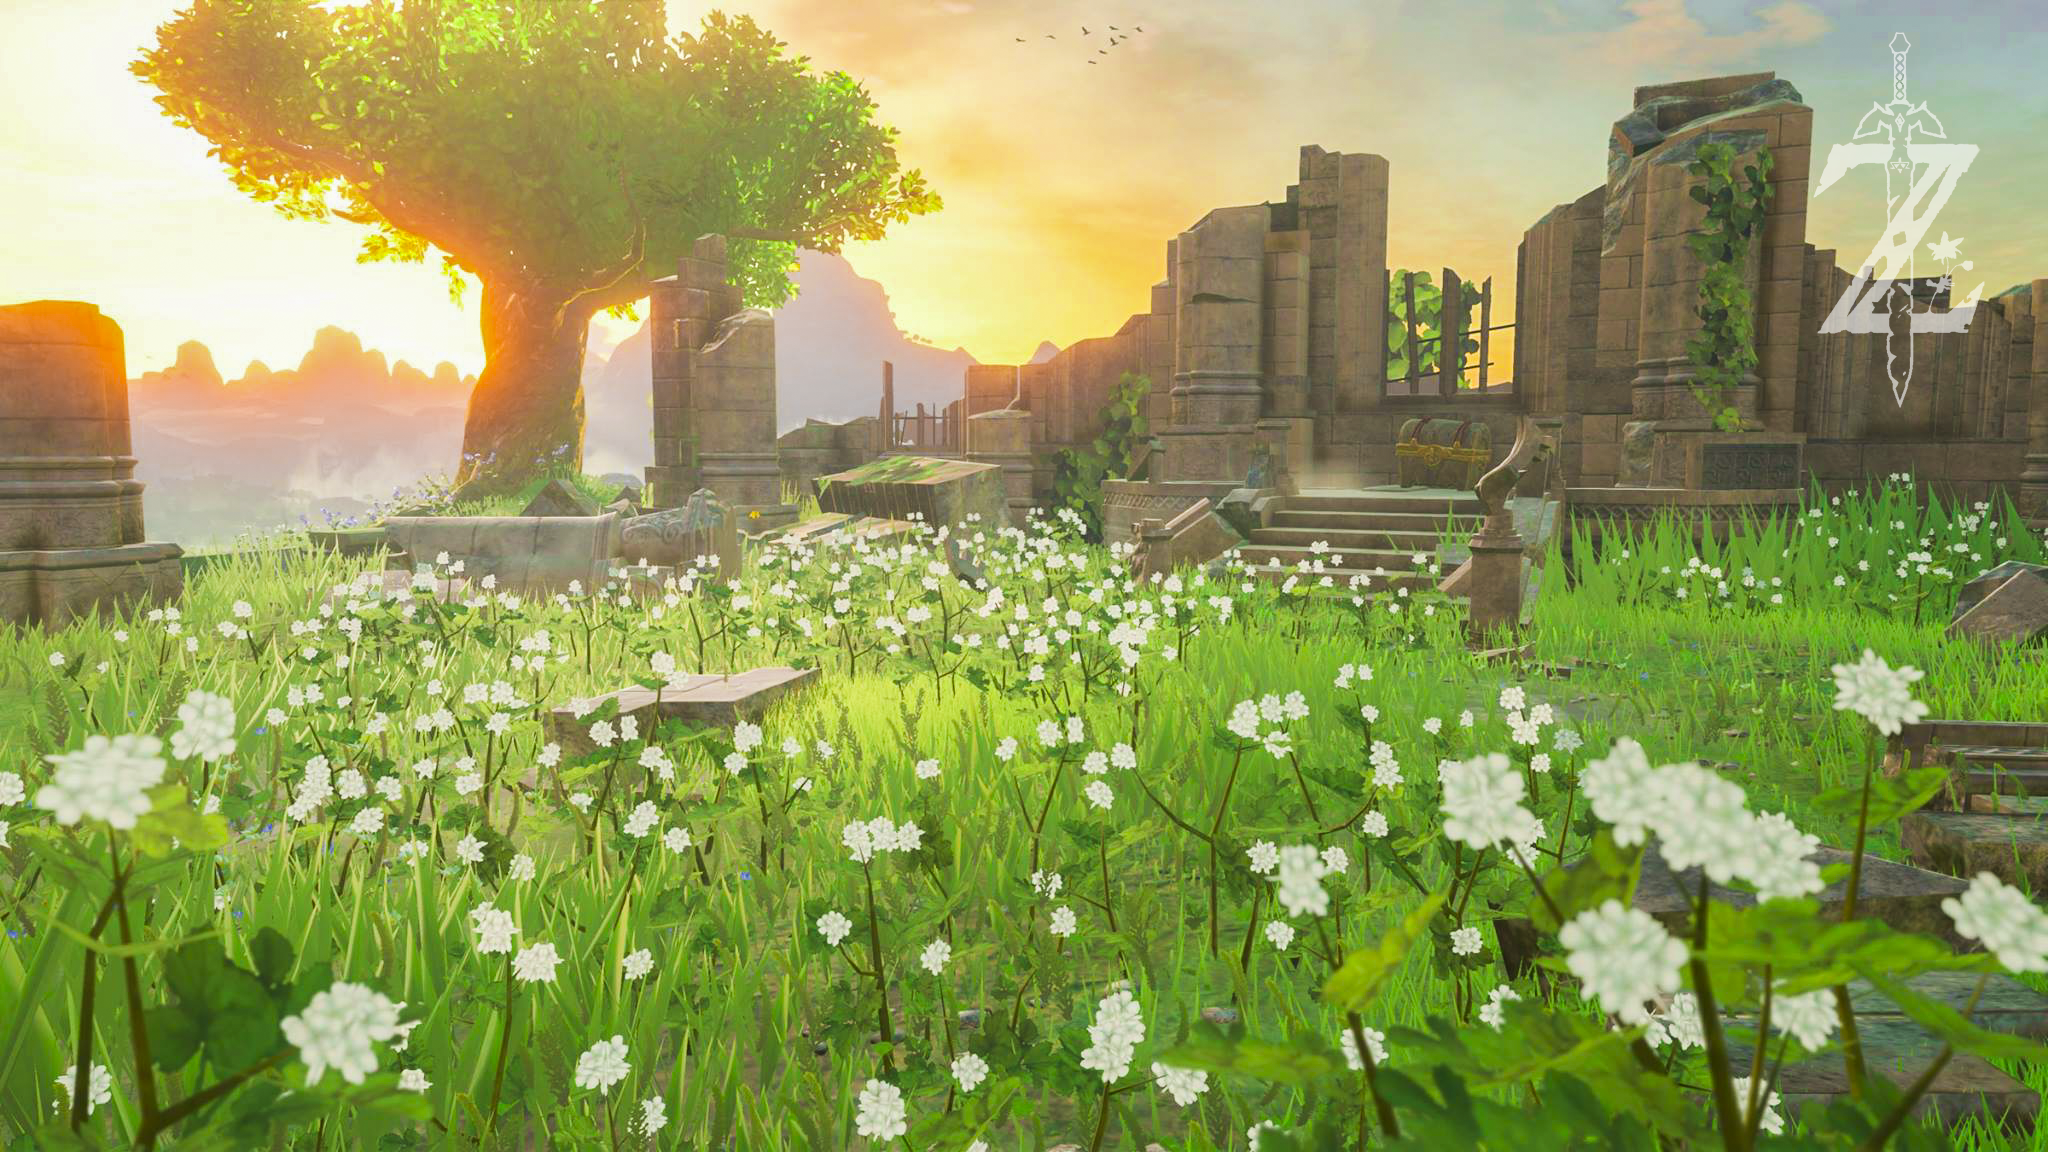 2048x1152 Gorgeous Hd Zelda Breath Of The Wild Wallpaper Quite Quintessential The Stuff Of Life